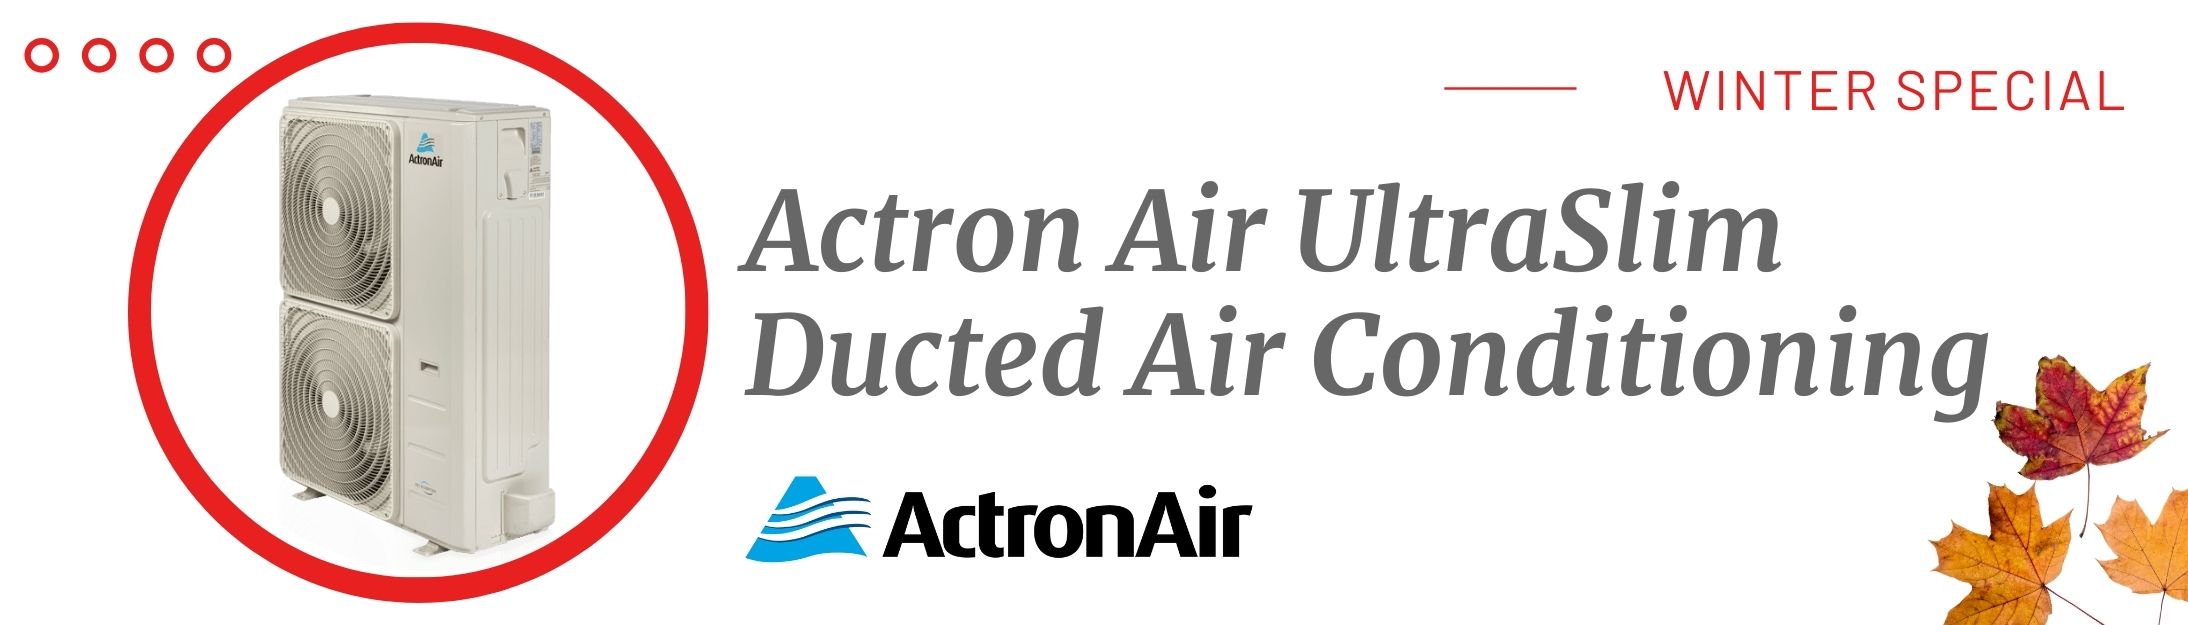 Actron Air Winter Special